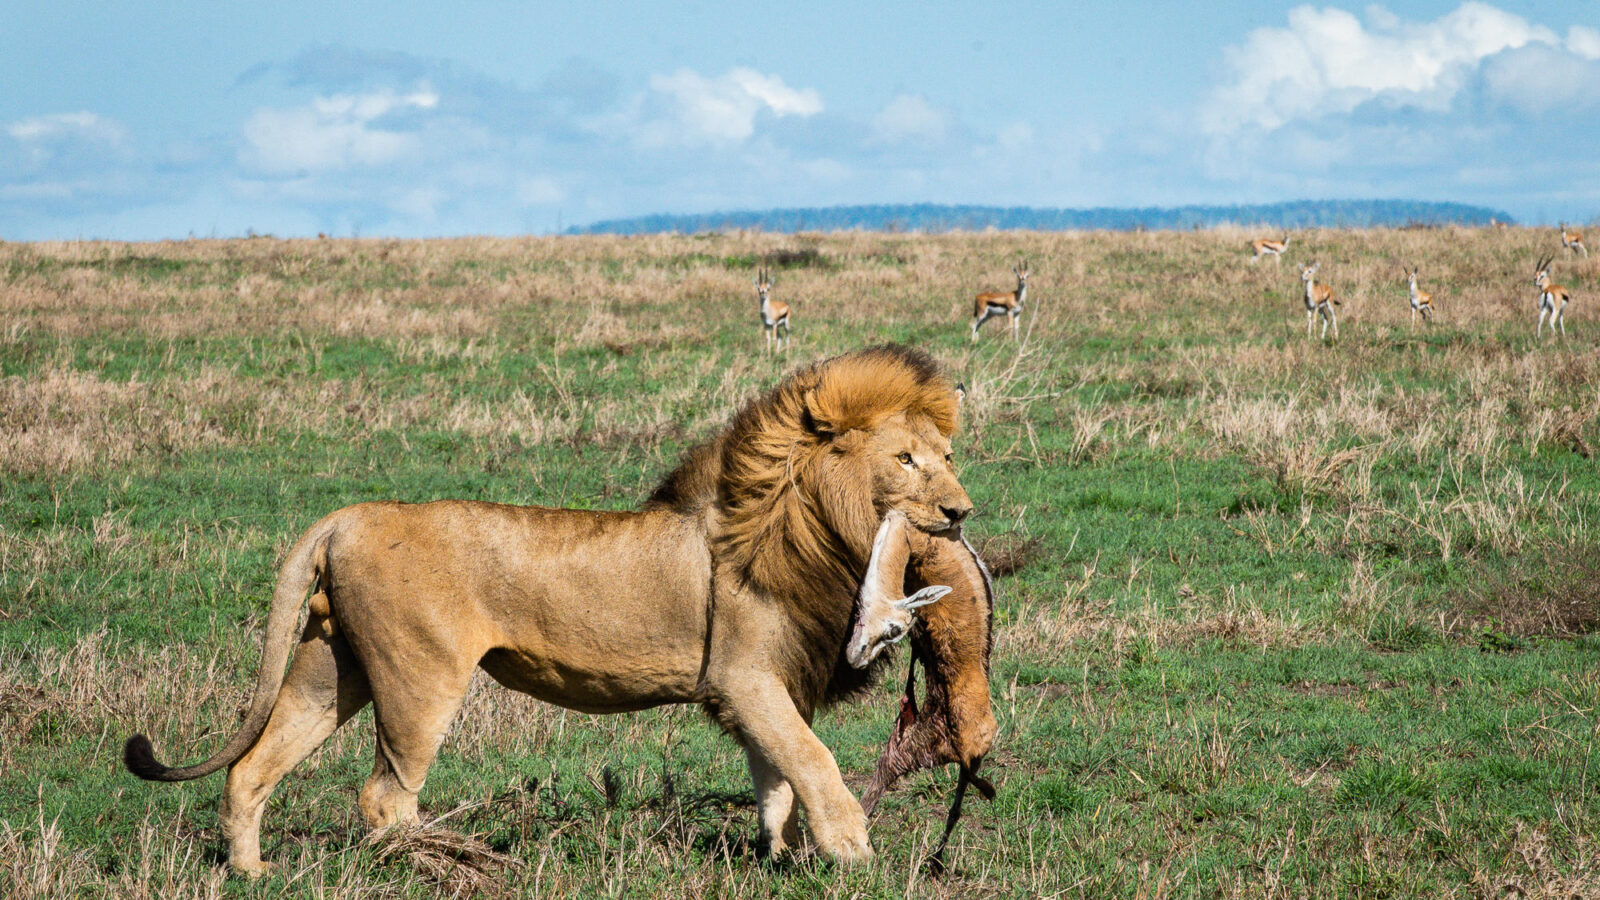 Lion walks away with prey during a safari in an african national park